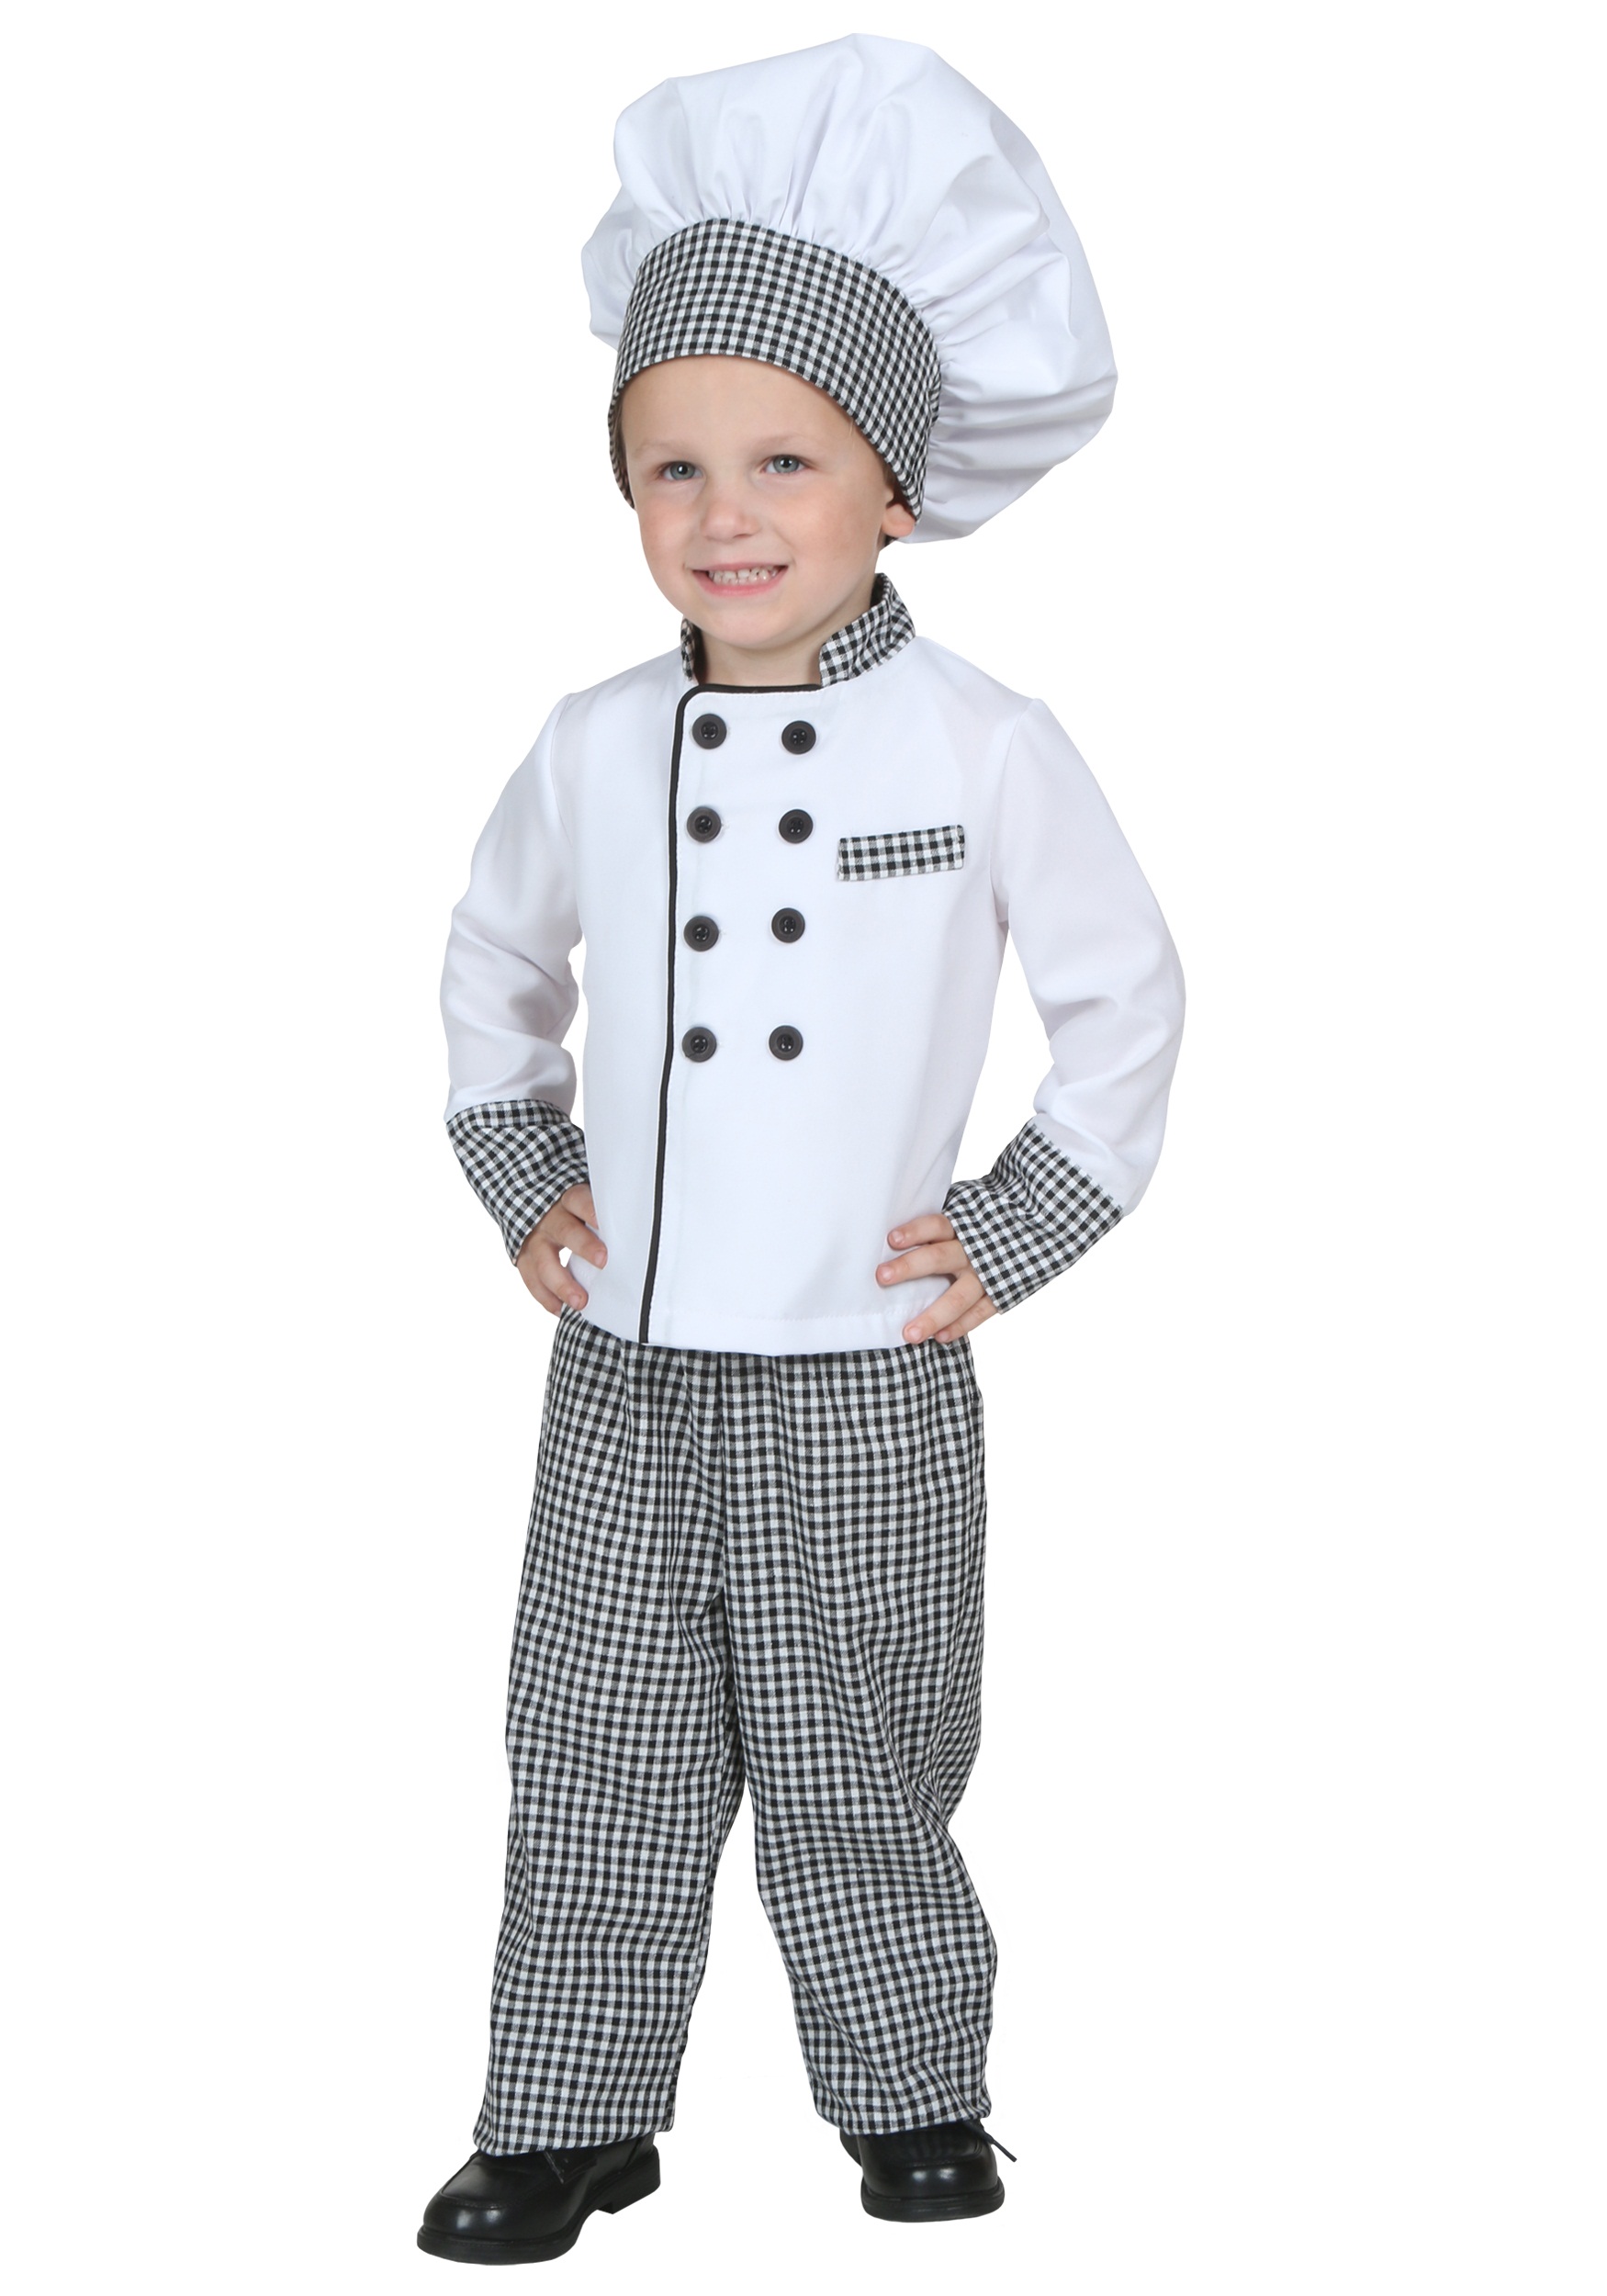 Chef Costume for Toddlers | Uniform Costume | Exclusive